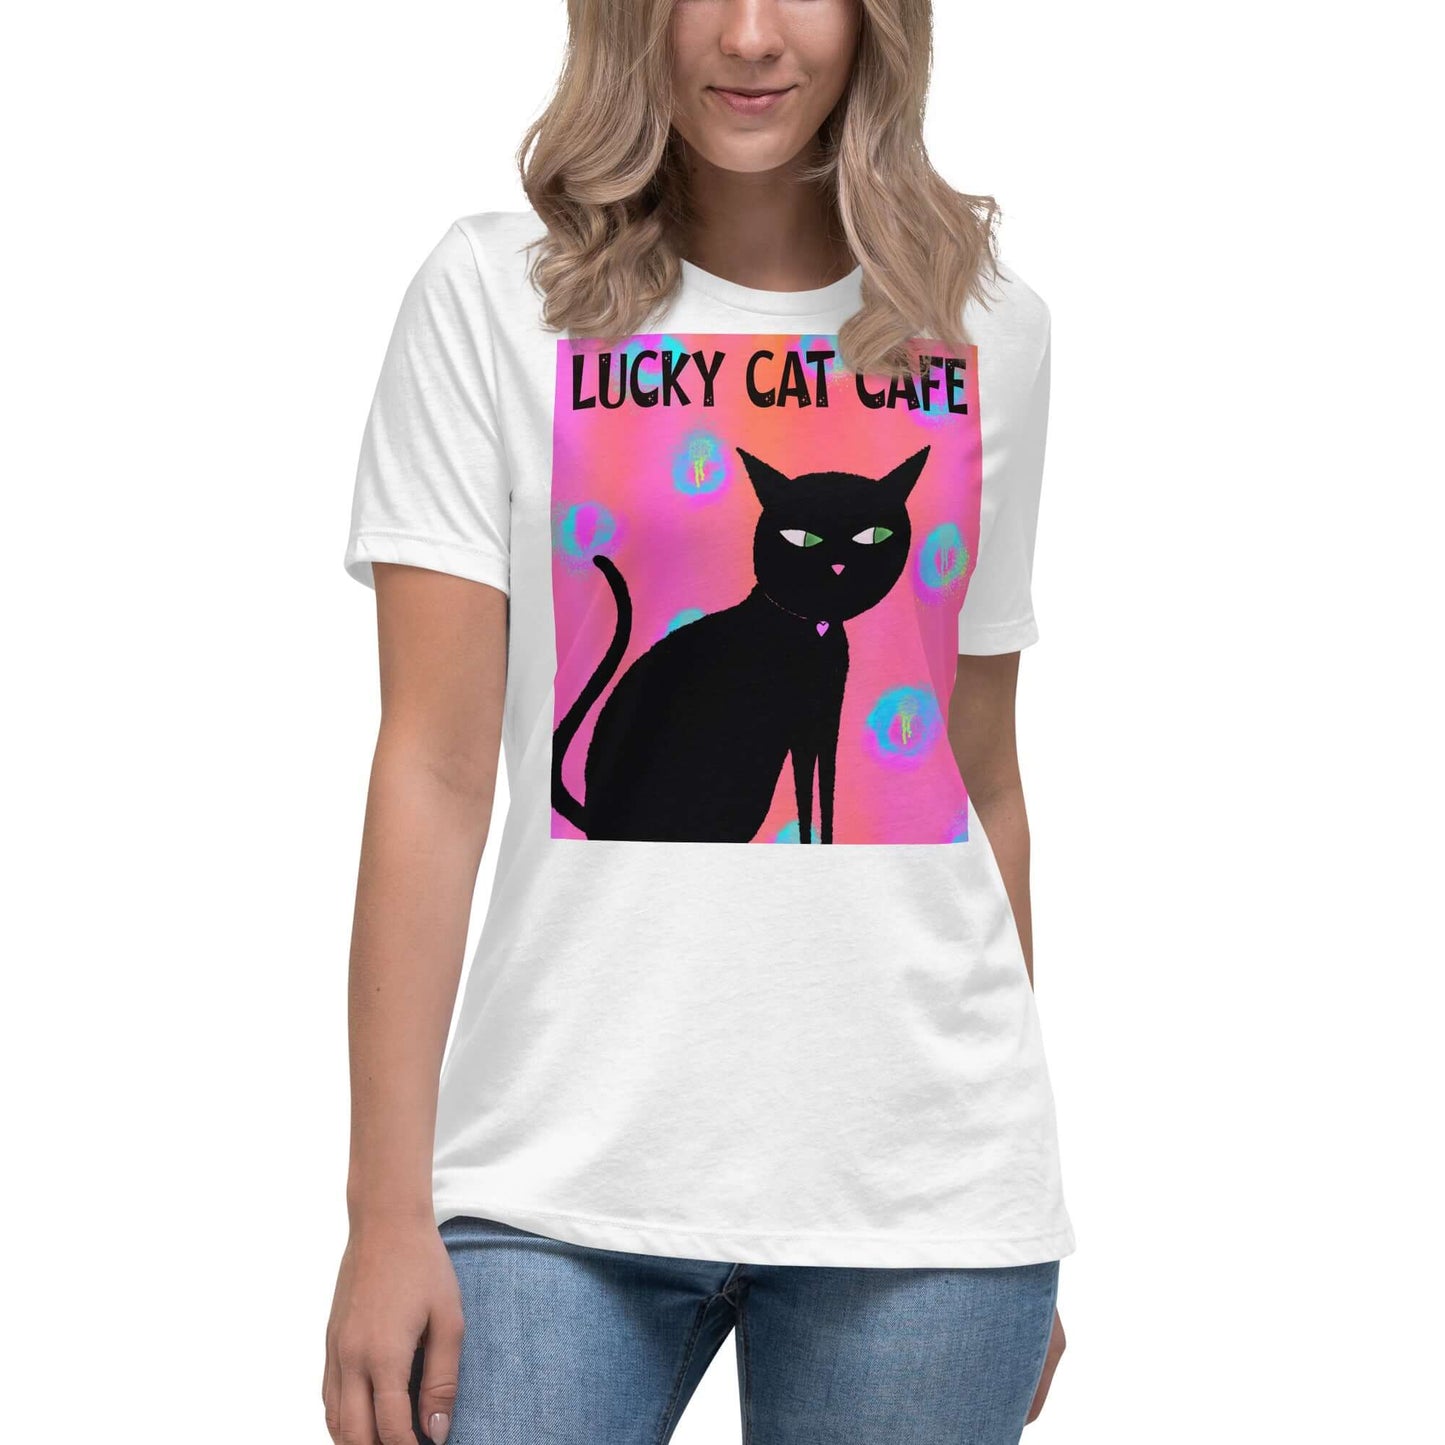 Black Cat on Hot Pink Tie Dye Background with Text “Lucky Cat Cafe” Women’s Short Sleeve Tee in White